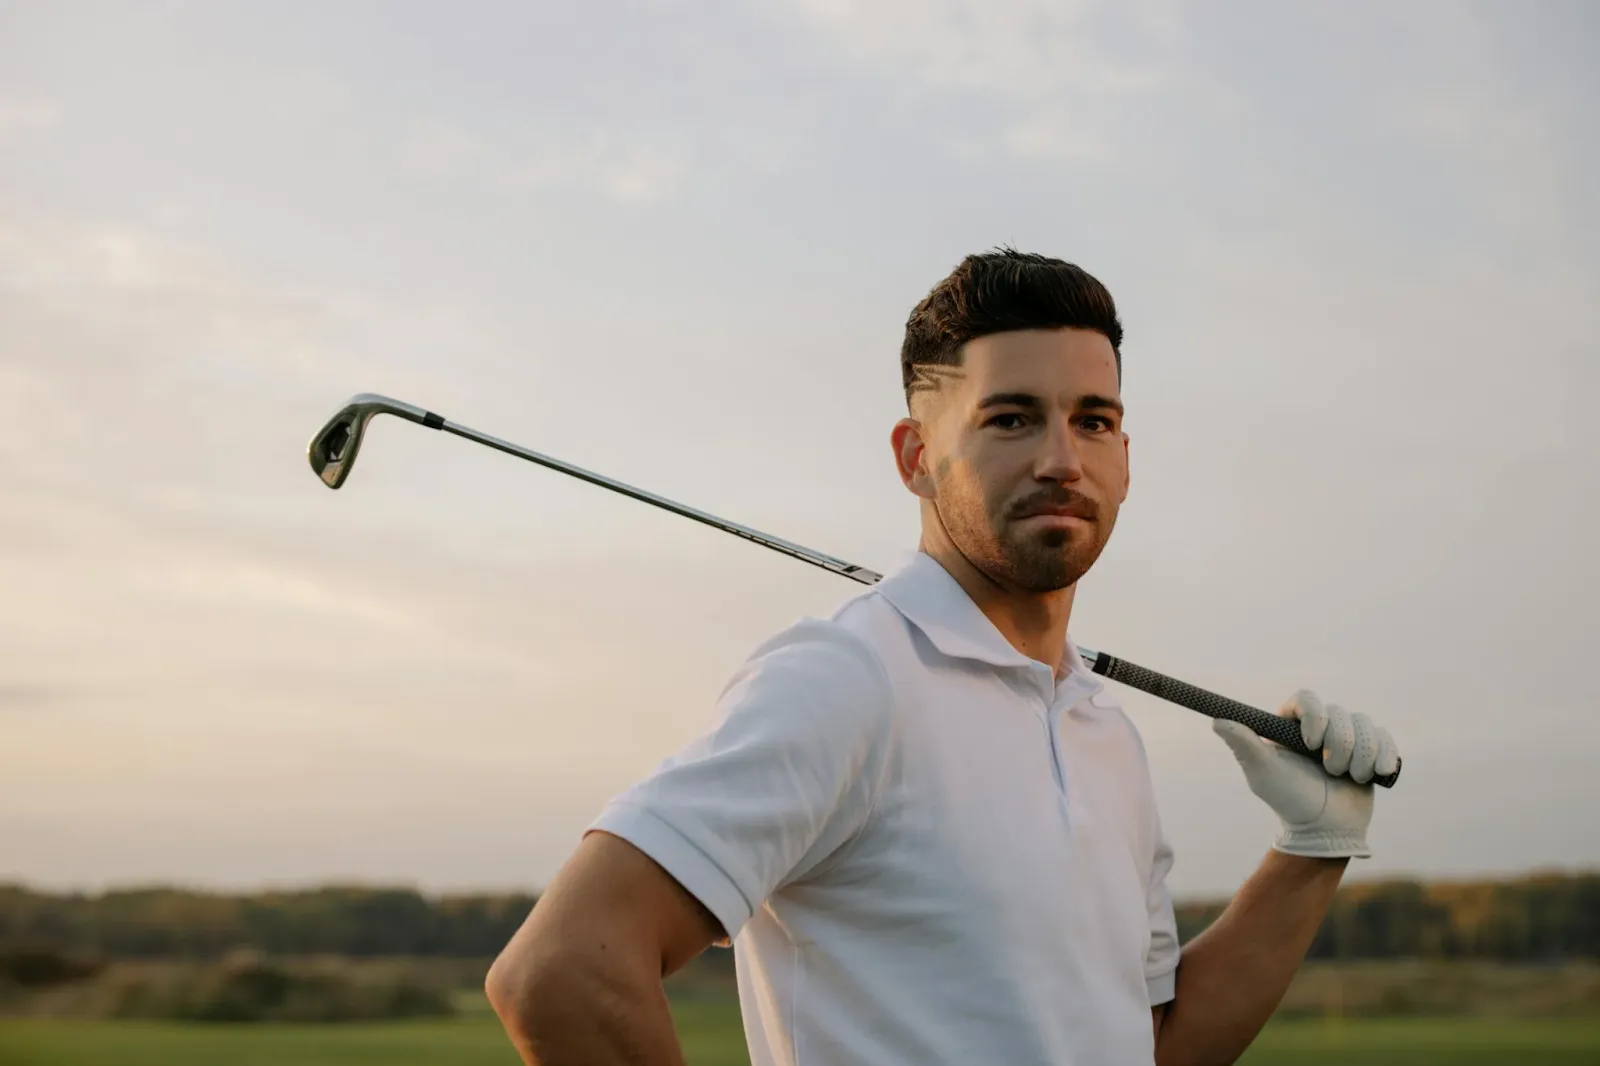 Calling golf enthusiasts: here’s how you can swing safely and protect your joints from pain